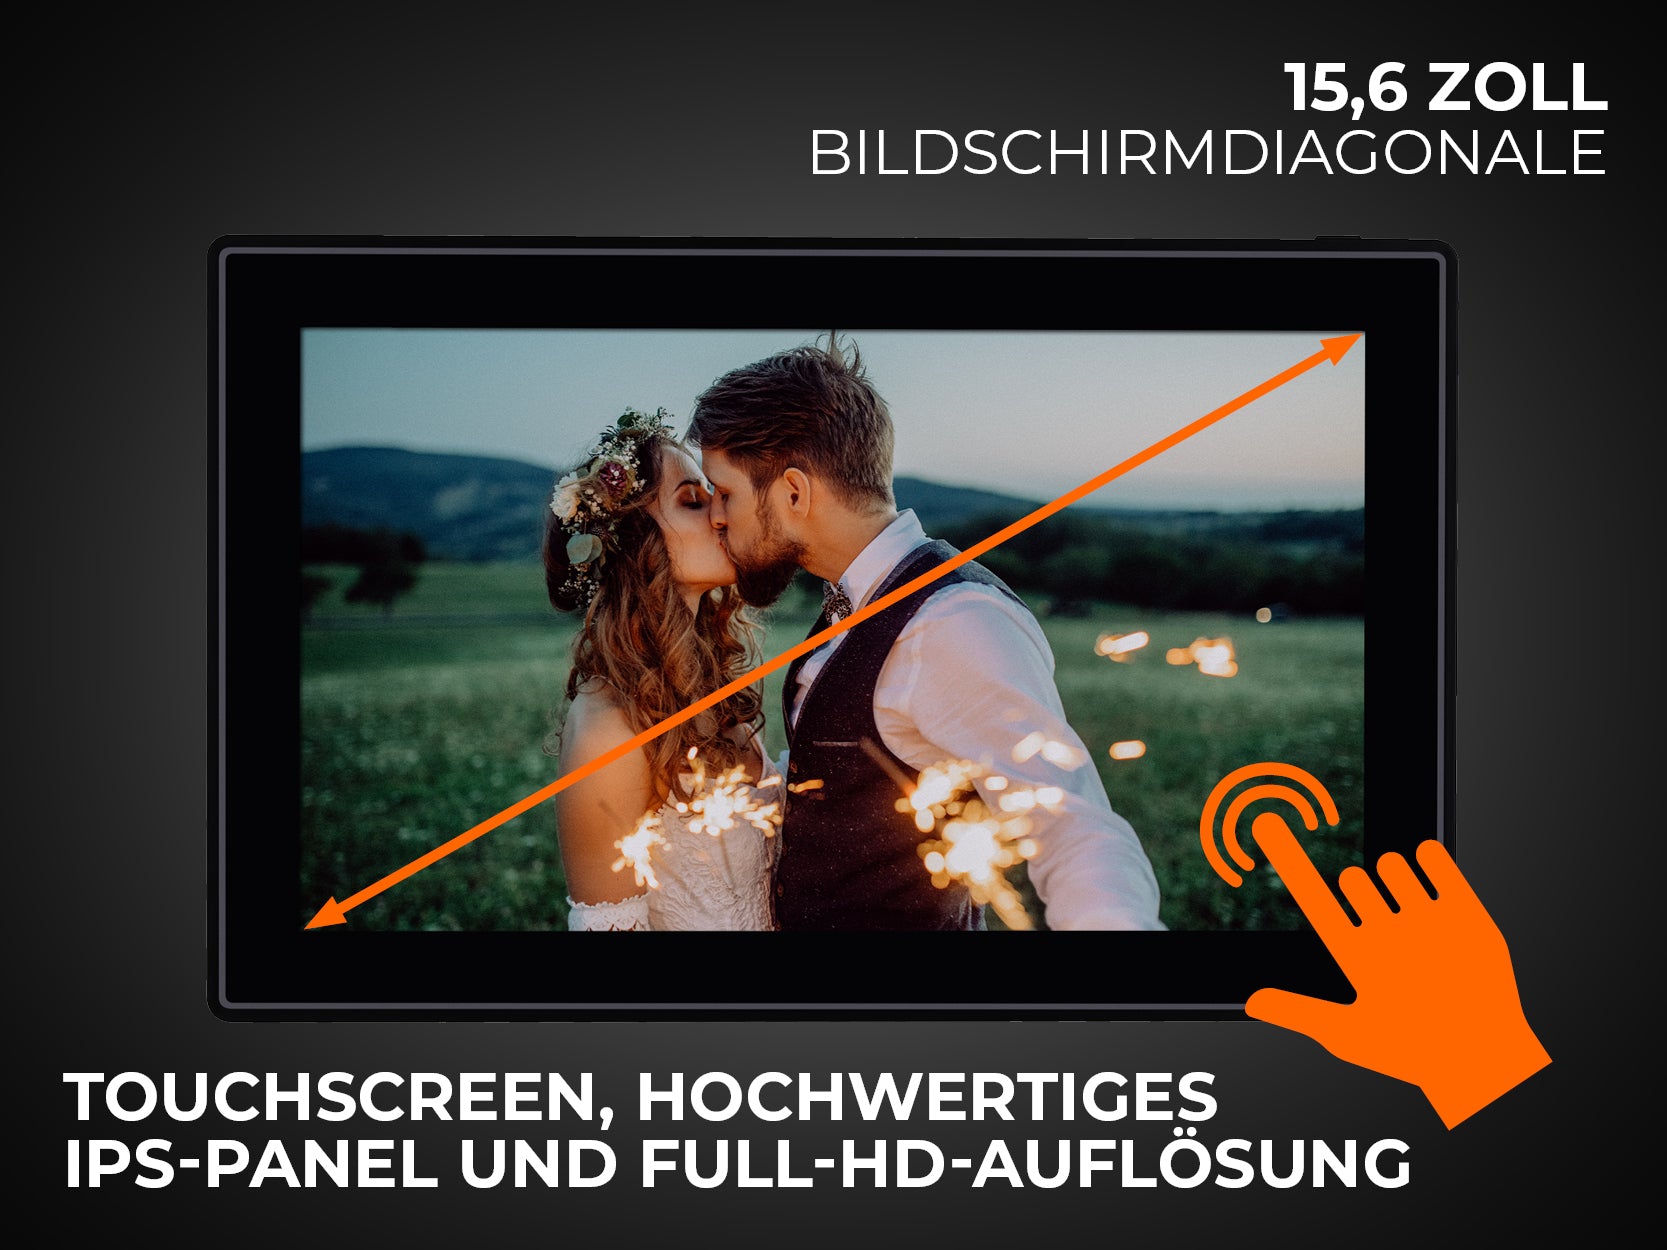 Touchscreen, high-quality IPS panel and full HD resolution